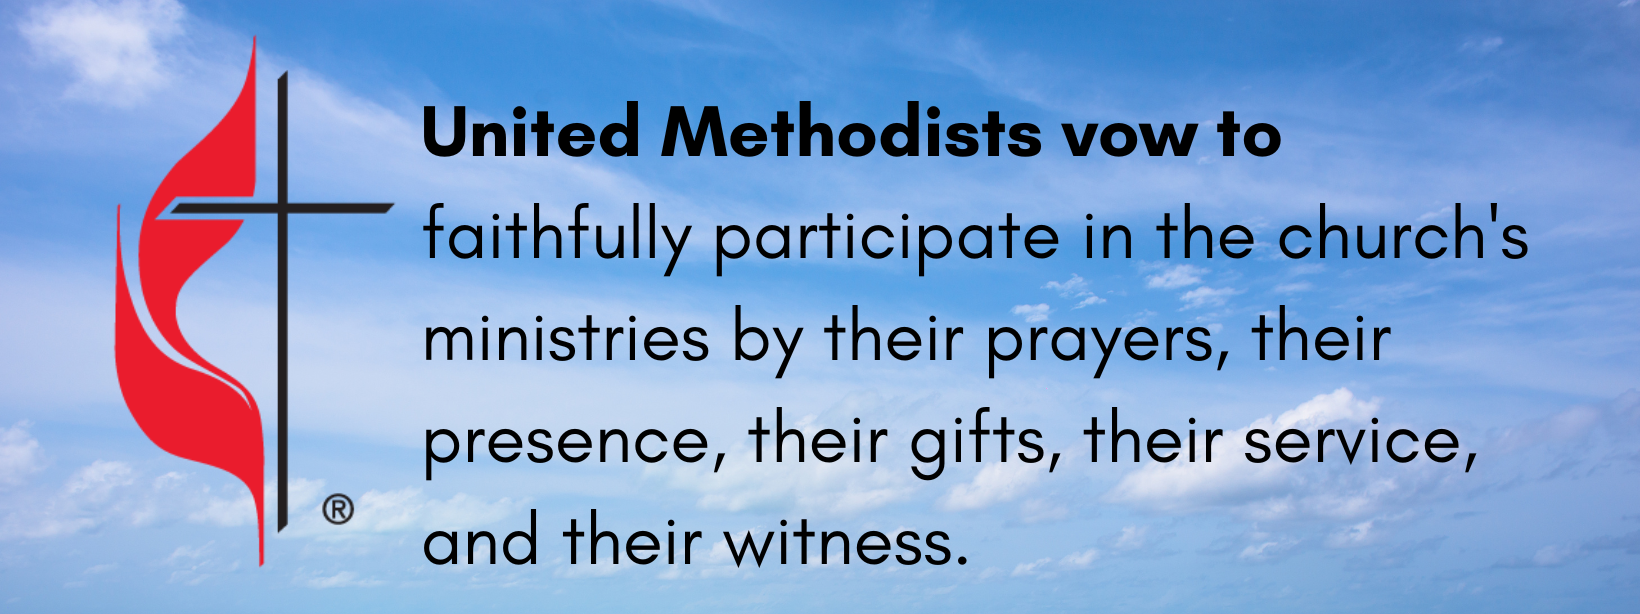 United Methodists vow to faithfully participate in the church's ministries by their prayer, their presence, their gifts, their service, and their witness.